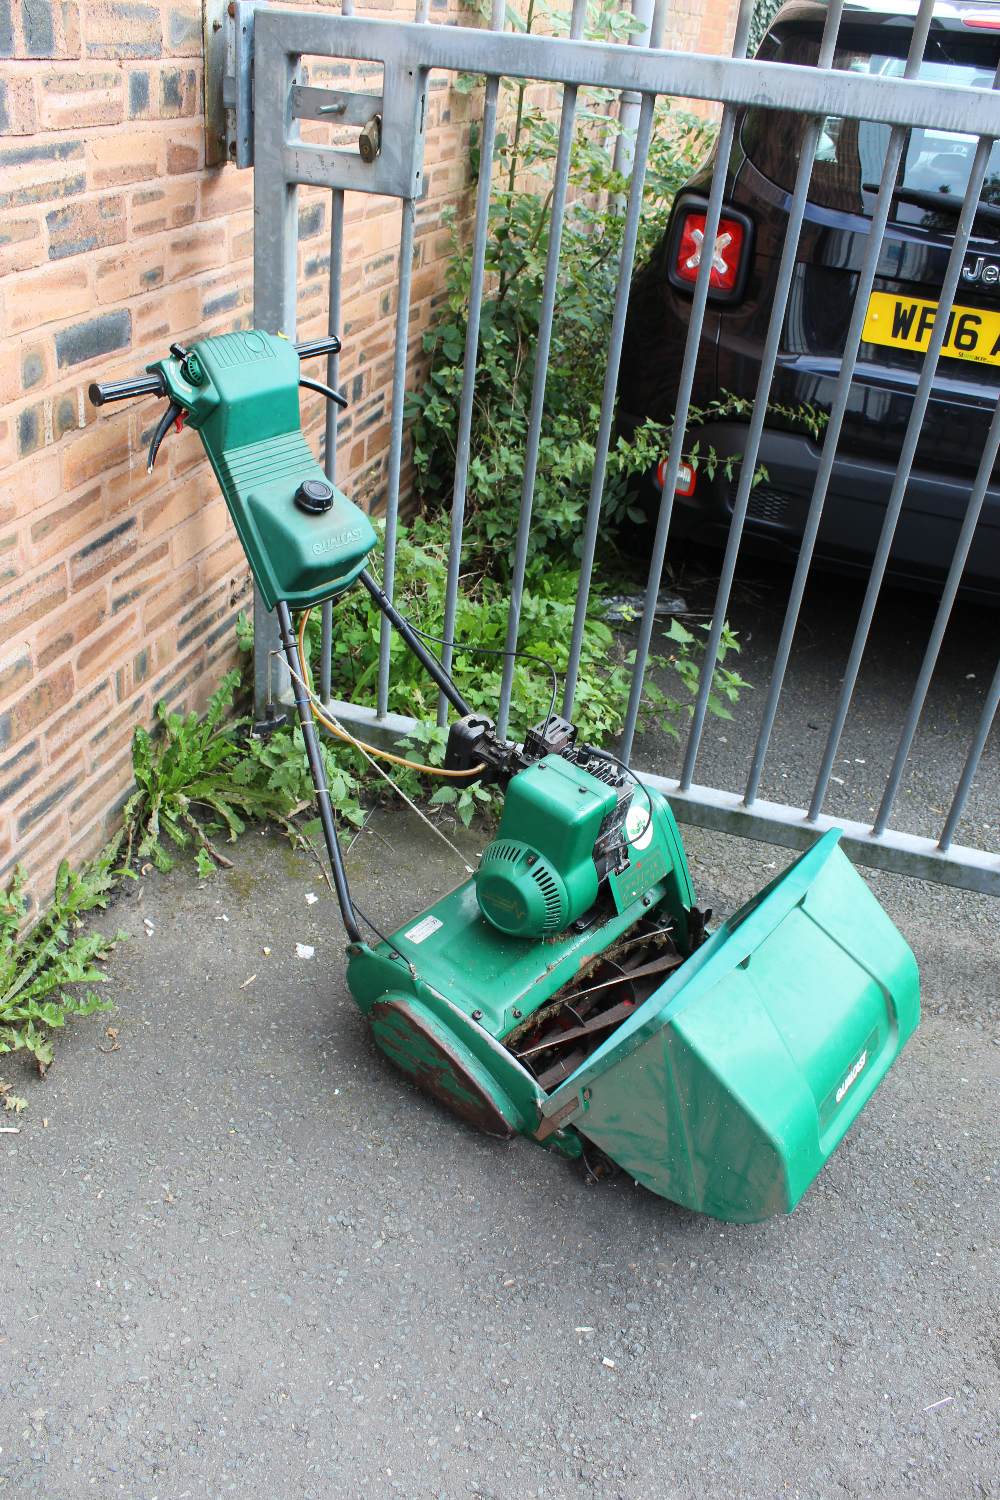 A QUALCAST SUFFOLK PUNCH 43S PETROL LAWNMOWER - Image 2 of 2